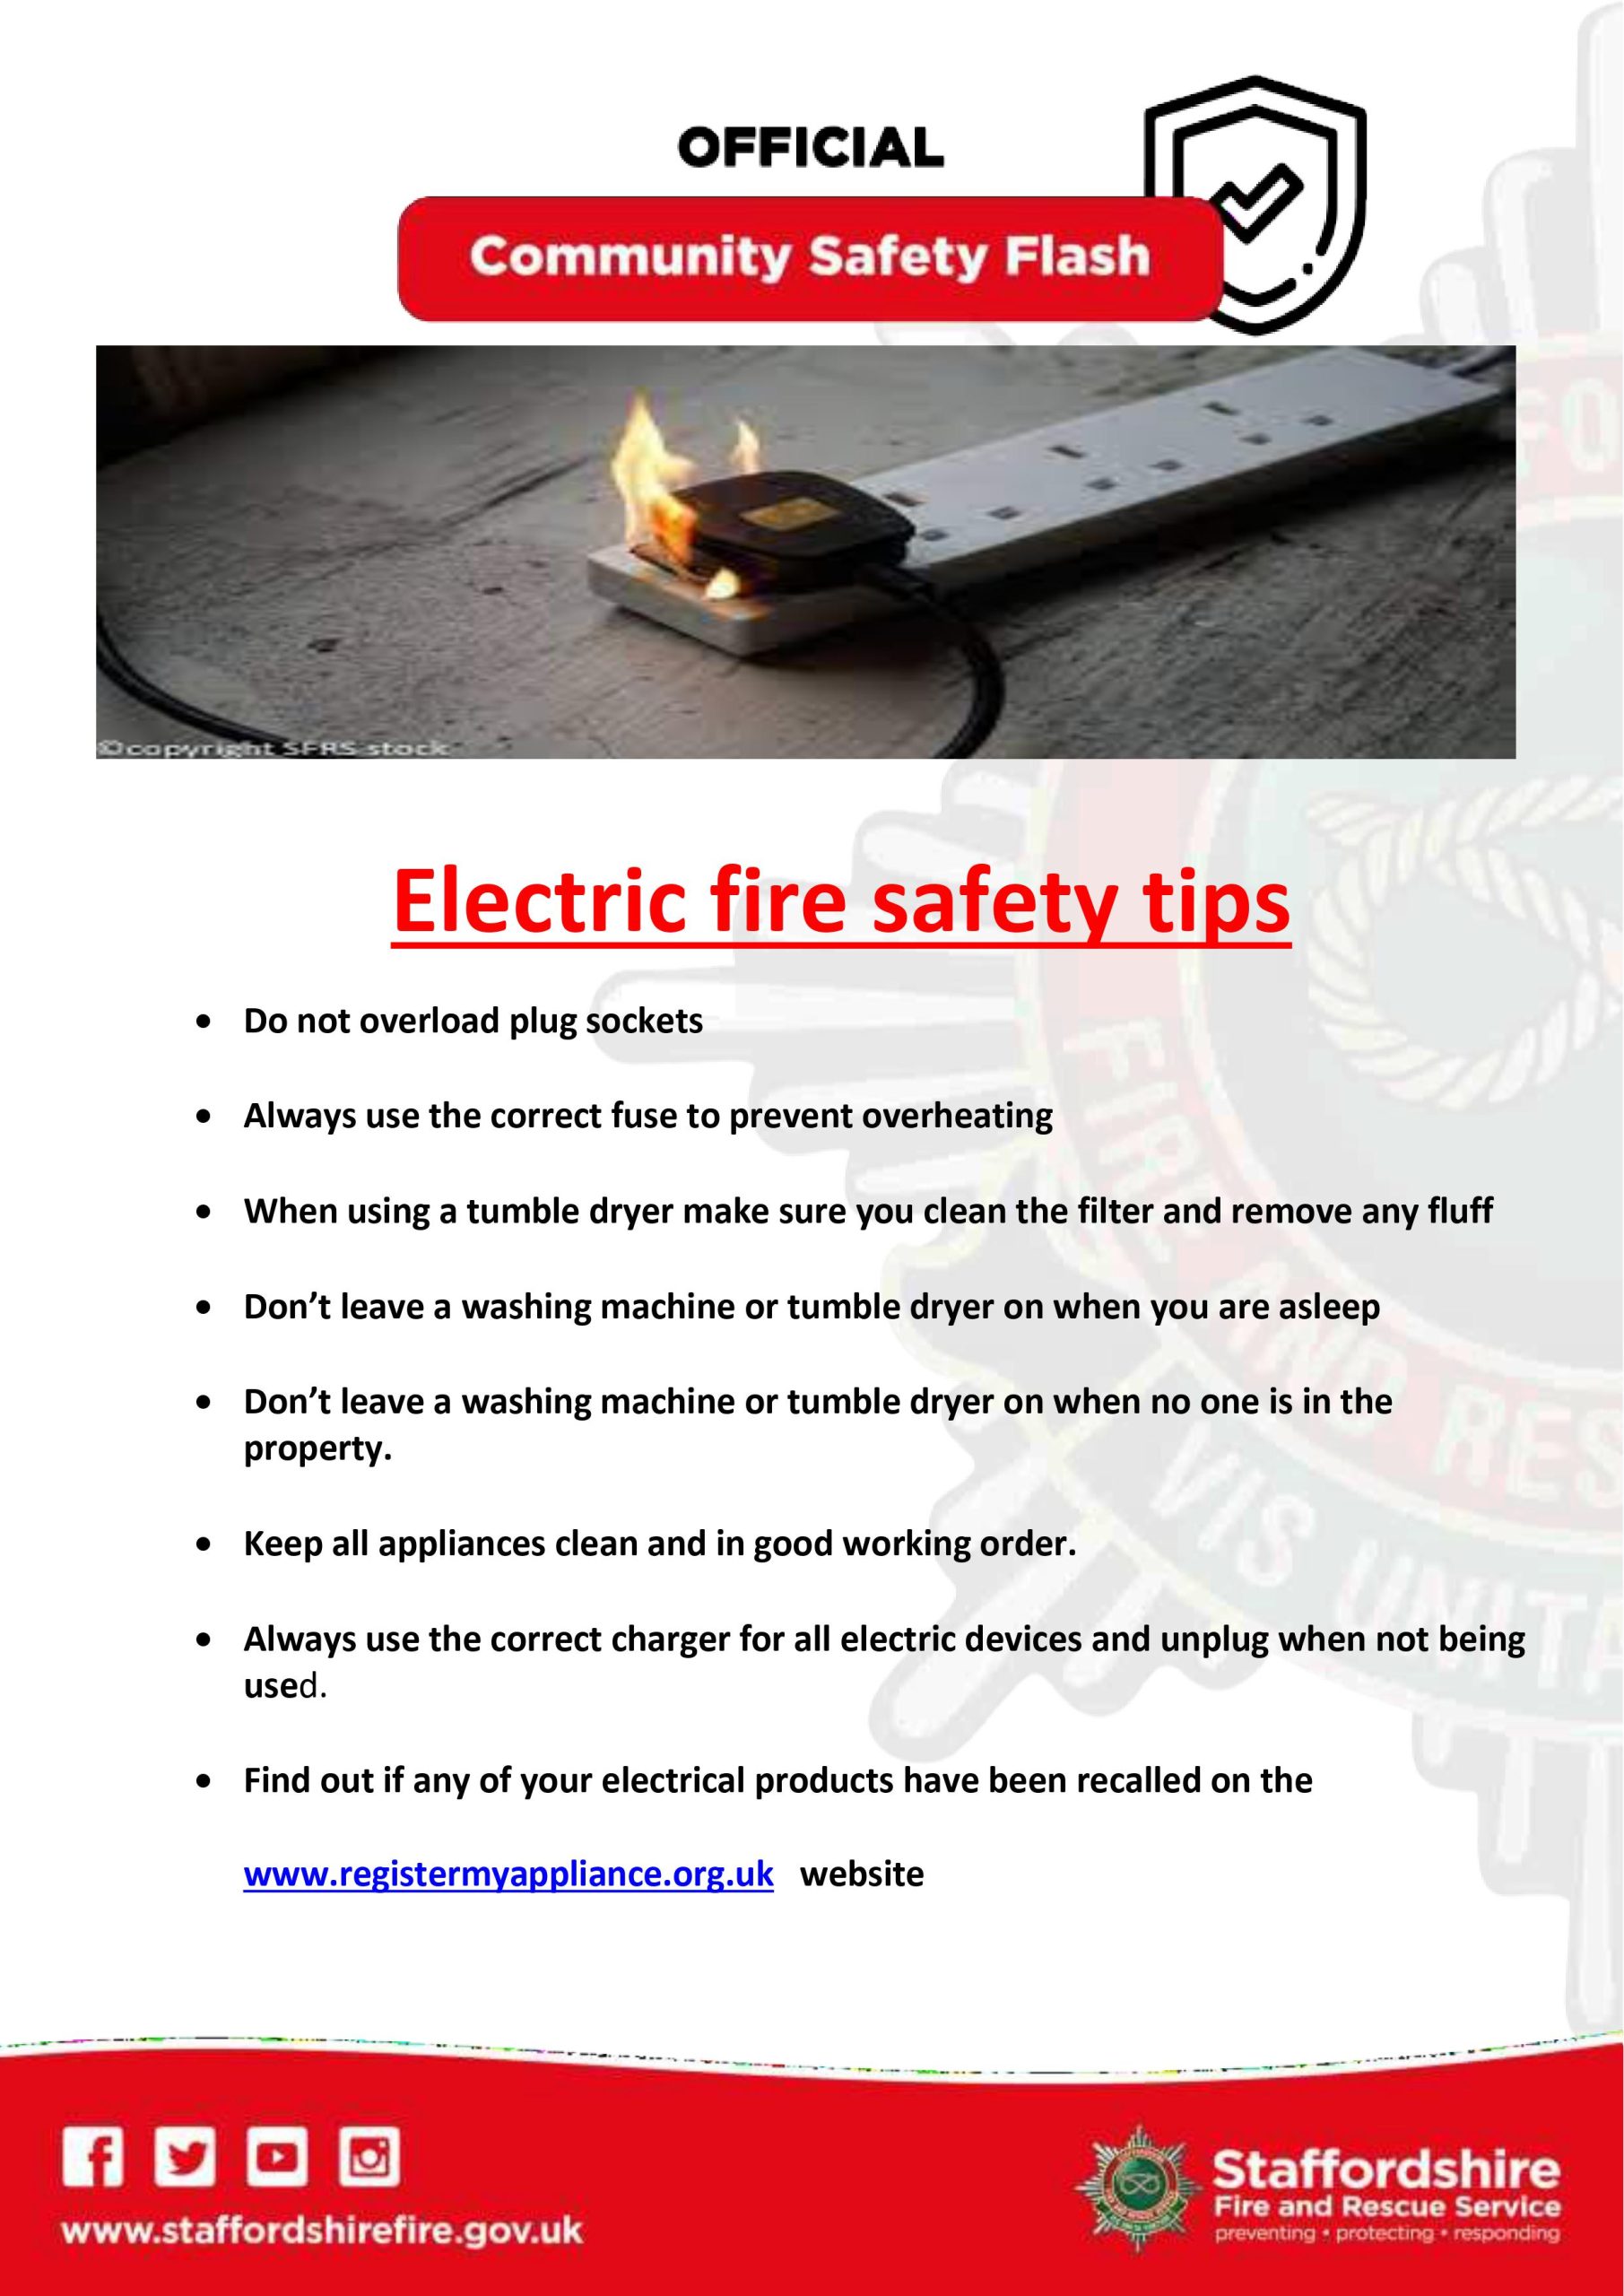 Electrical fire safety tips